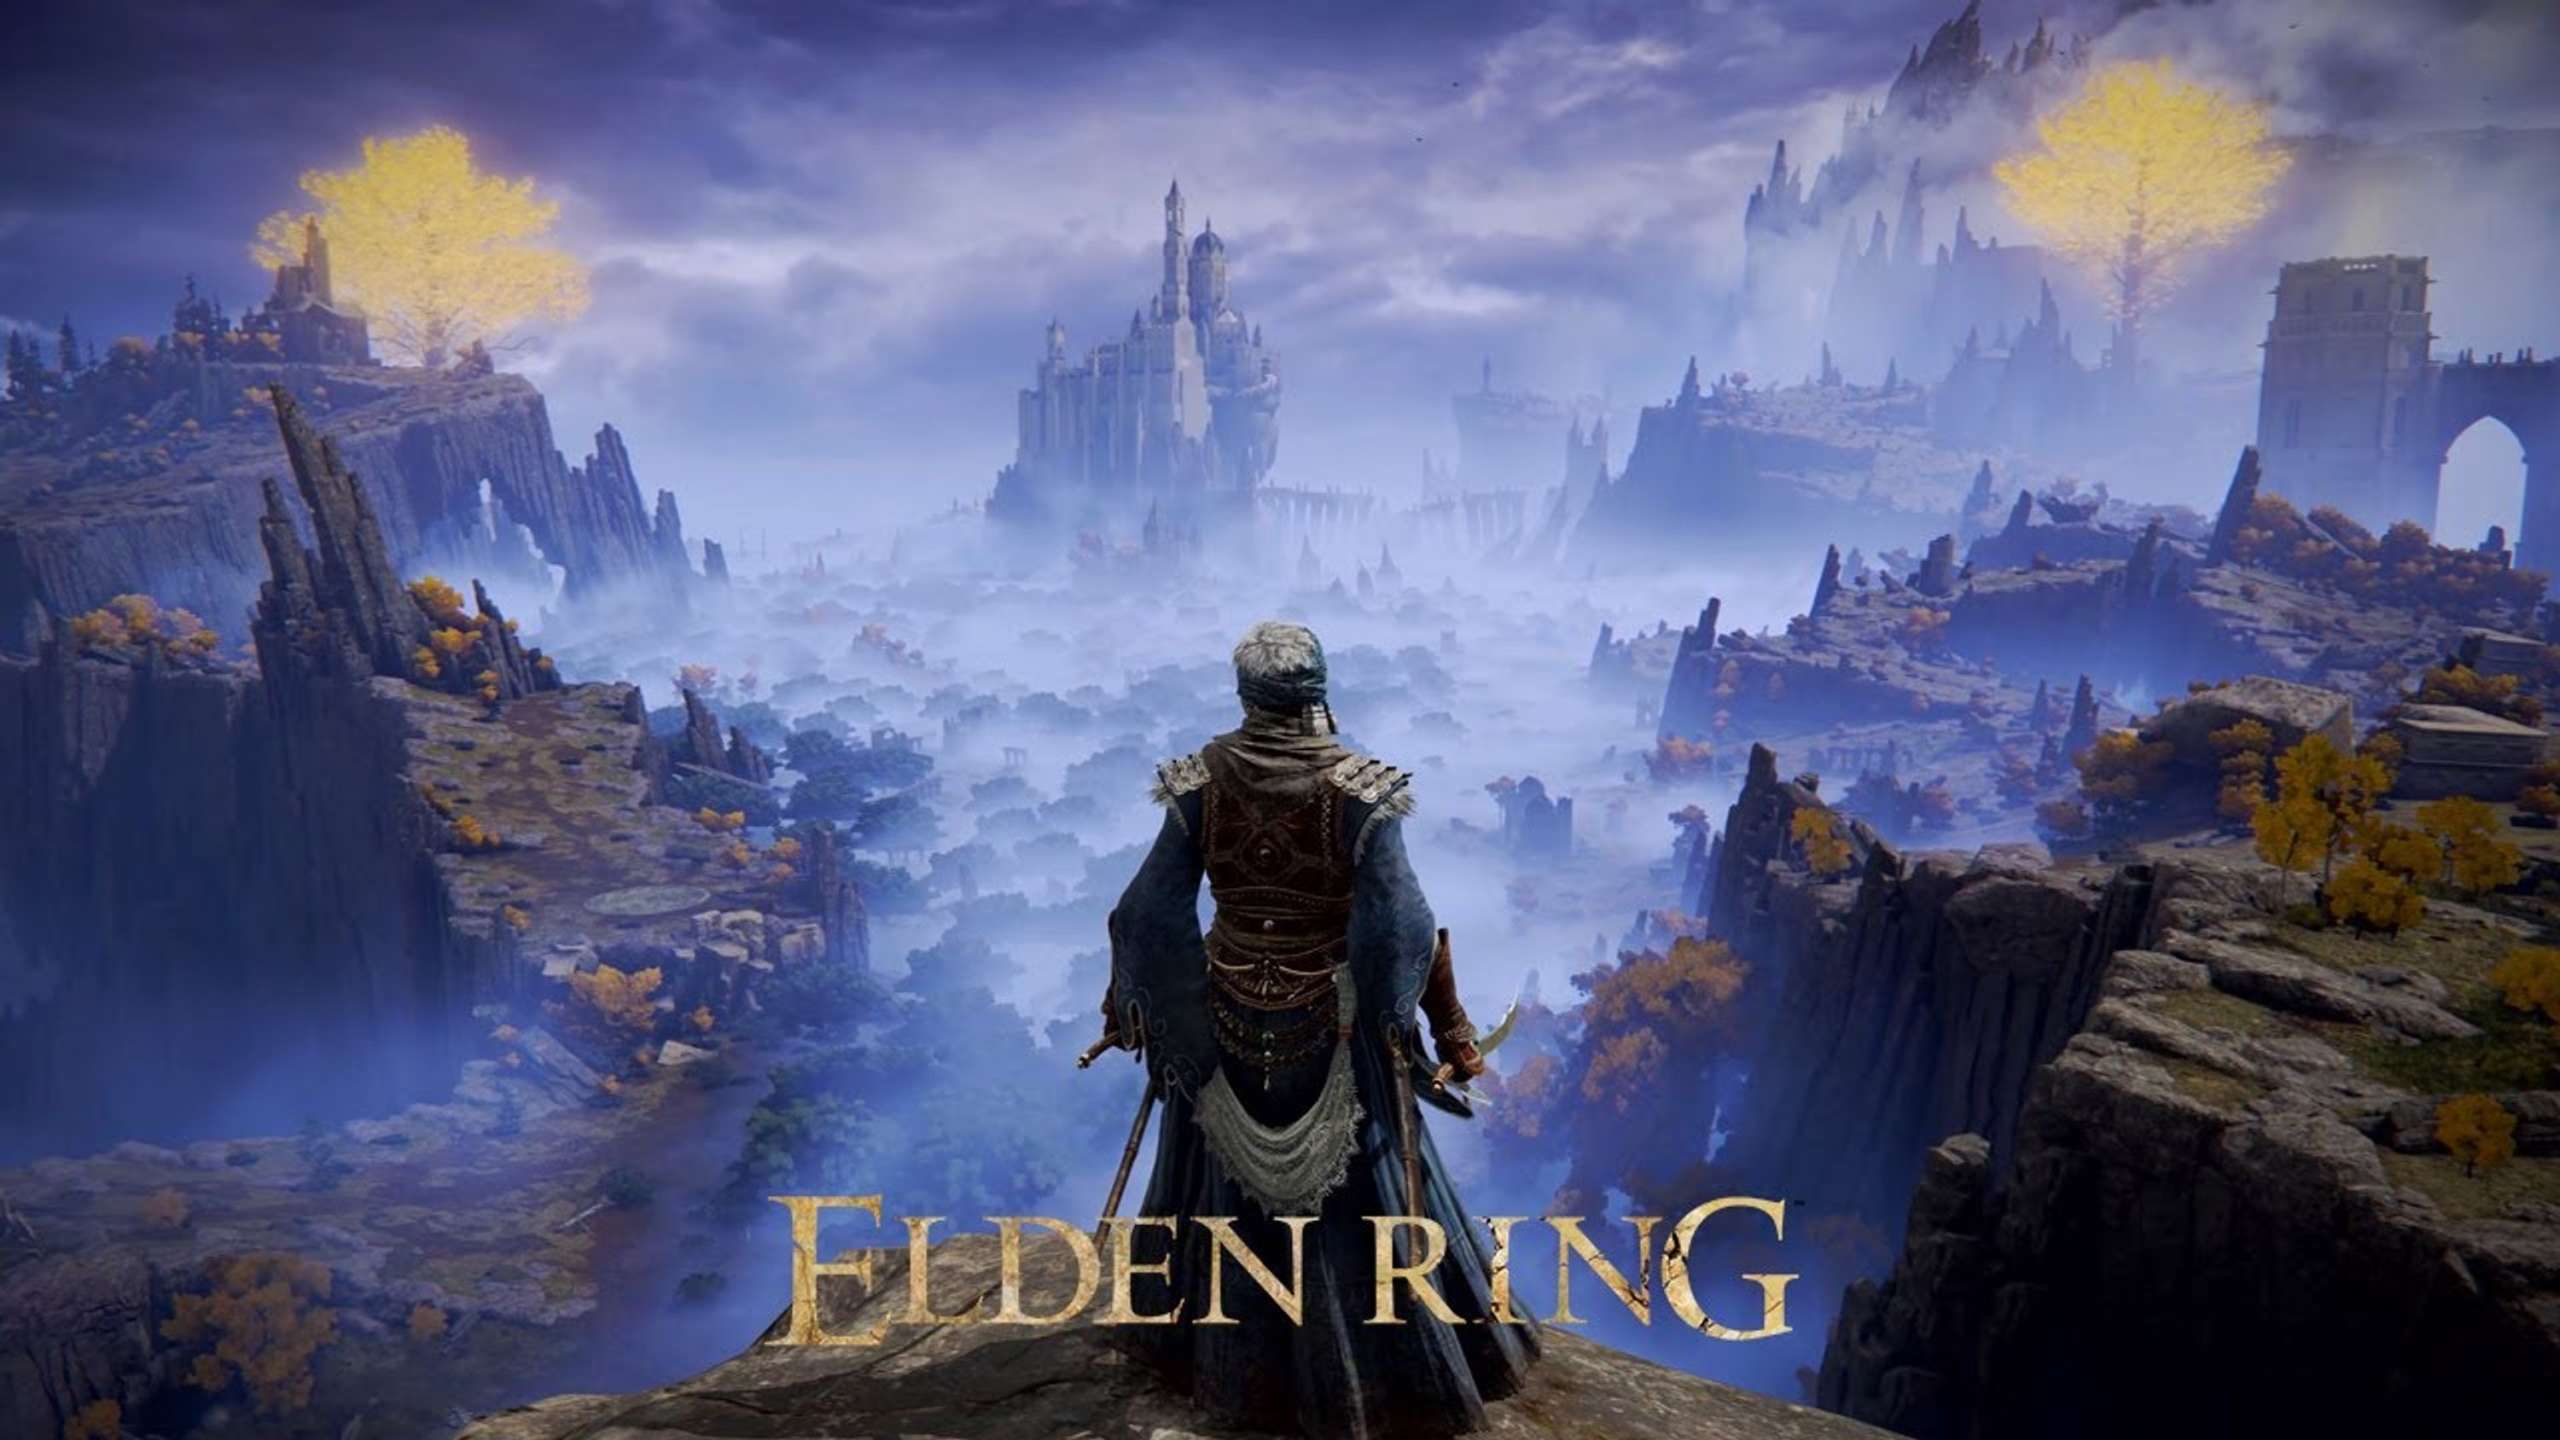 In Under 60 Days, Elden Ring’s Game Release On YouTube Was One Of The Most Successful Game Releases Ever, With 3.4 Billion Views On YouTube